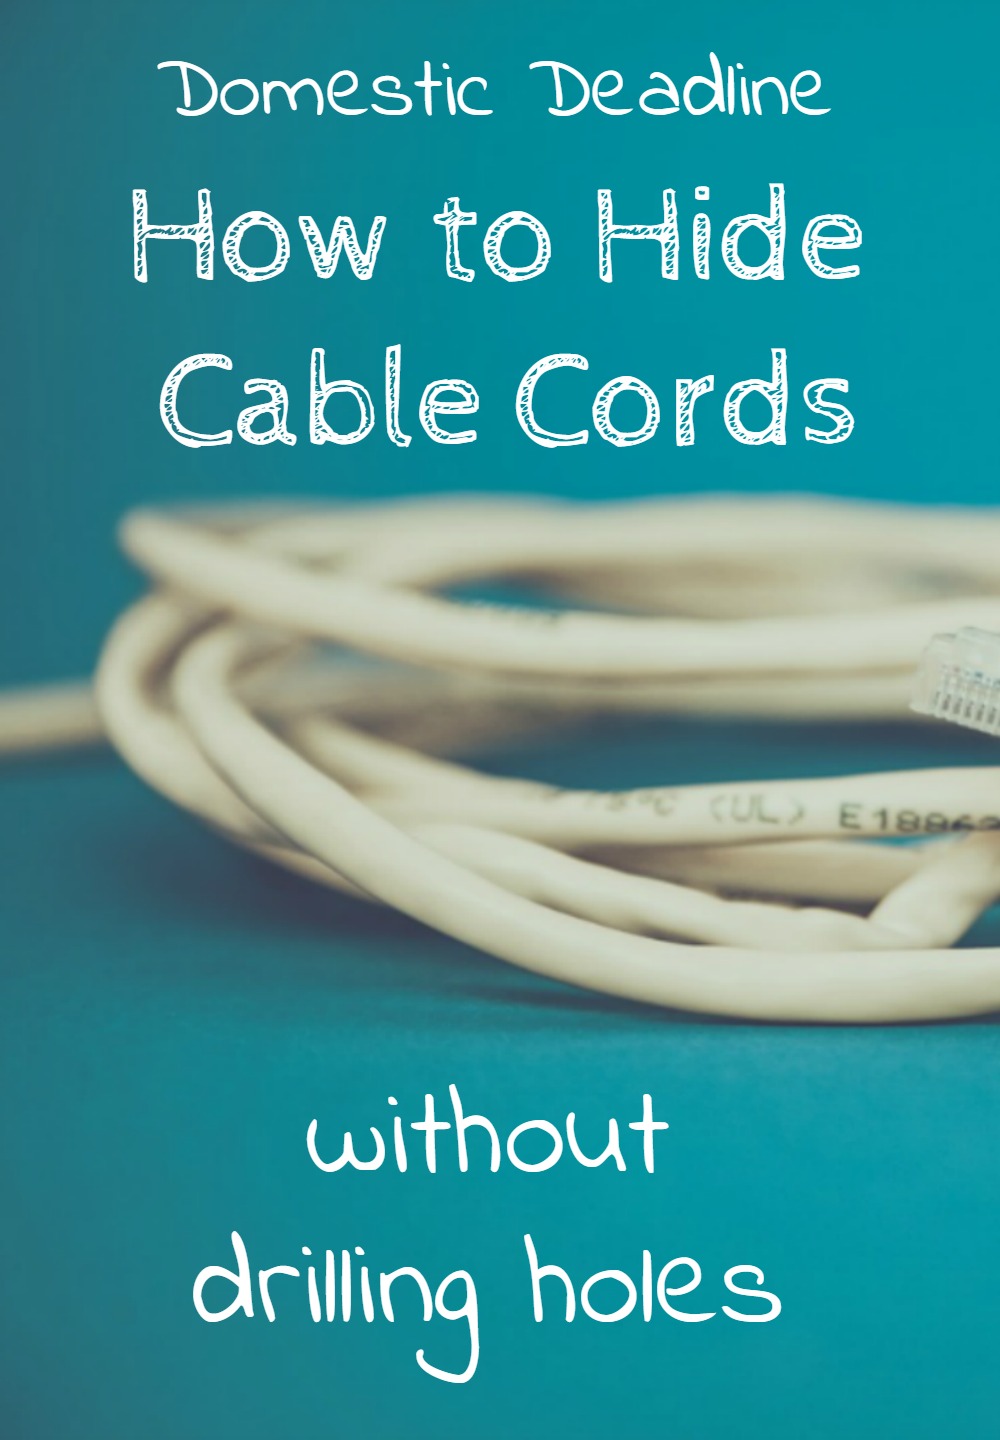 Hide cable cords without drilling holes patching drywall Domestic